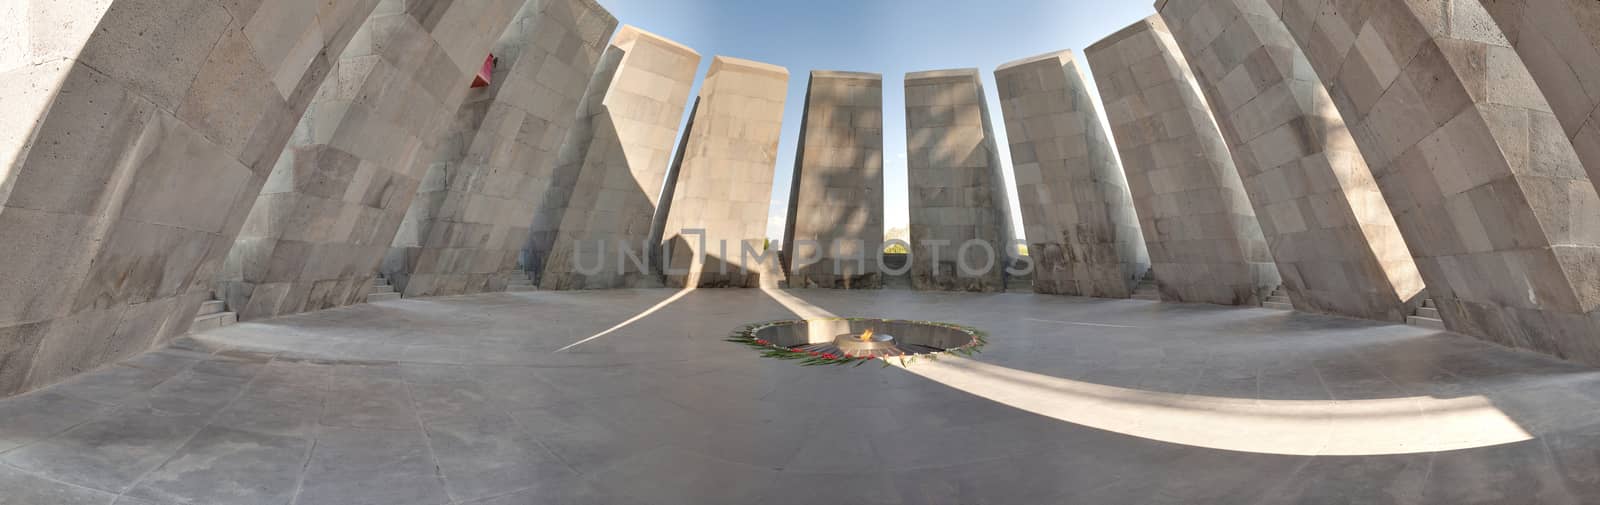 Monument to the victims of genocide of Armenians in the city of Yerevan